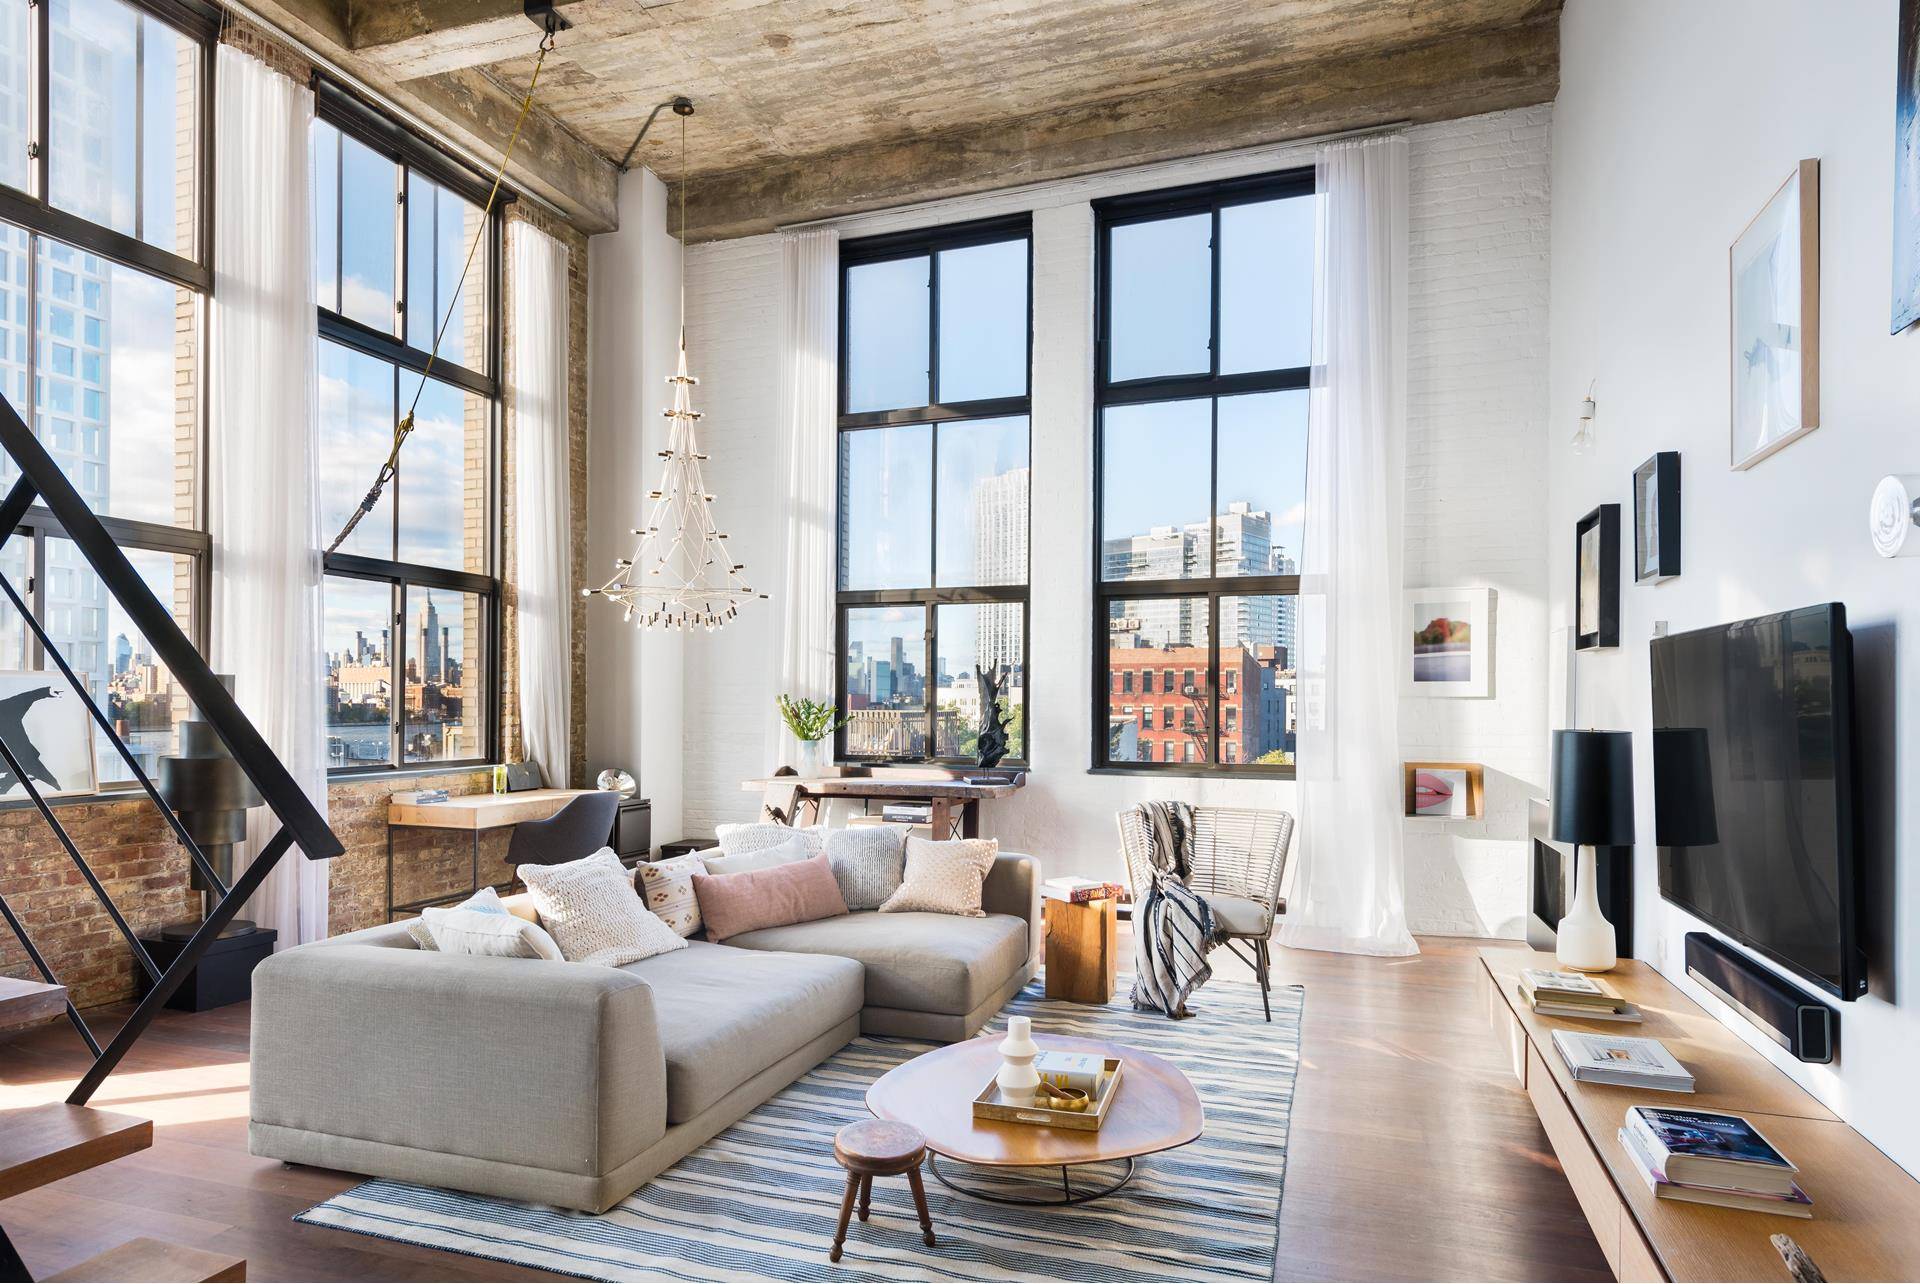 INDUSTRIAL CHIC WILLIAMSBURG LOFT Featured in WSJ amp ; NYTIMES, this exquisite duplex loft is located in the beloved converted prewar Condominium, The Esquire Building, at 330 Wythe Ave.